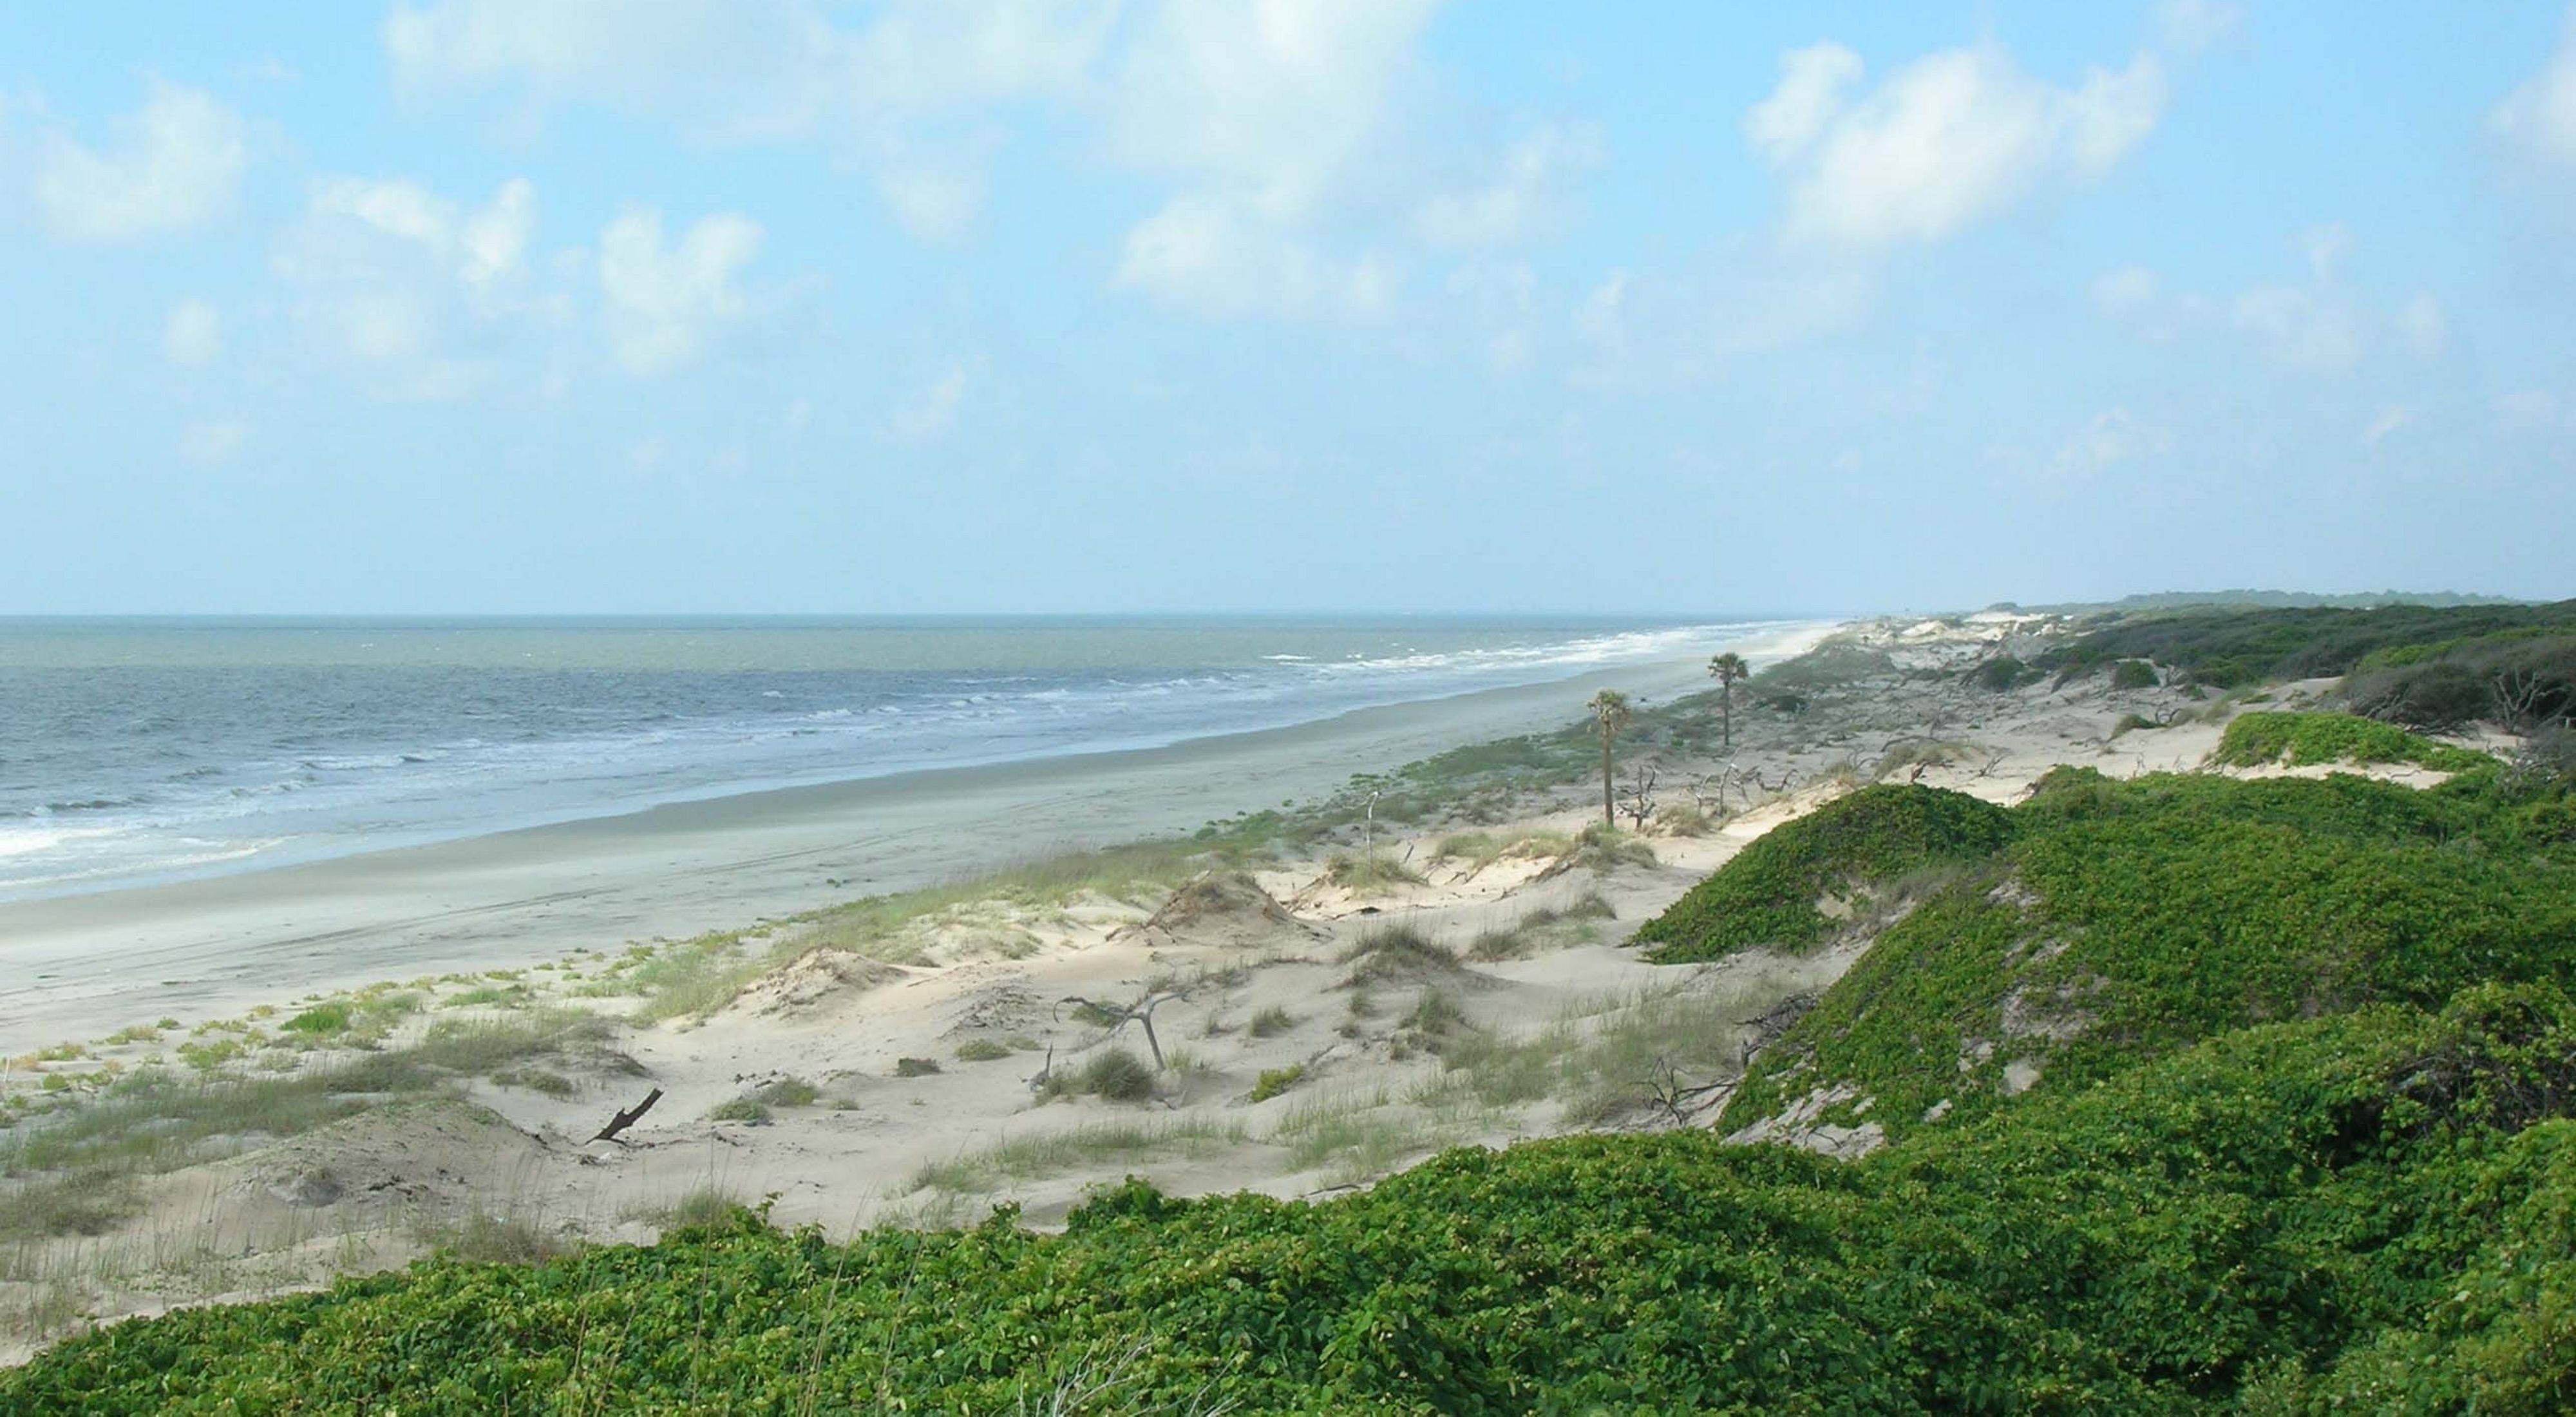 Cumberland Island’s natural treasures are preserved in large part by Cumberland Island National Seashore, established in 1972.